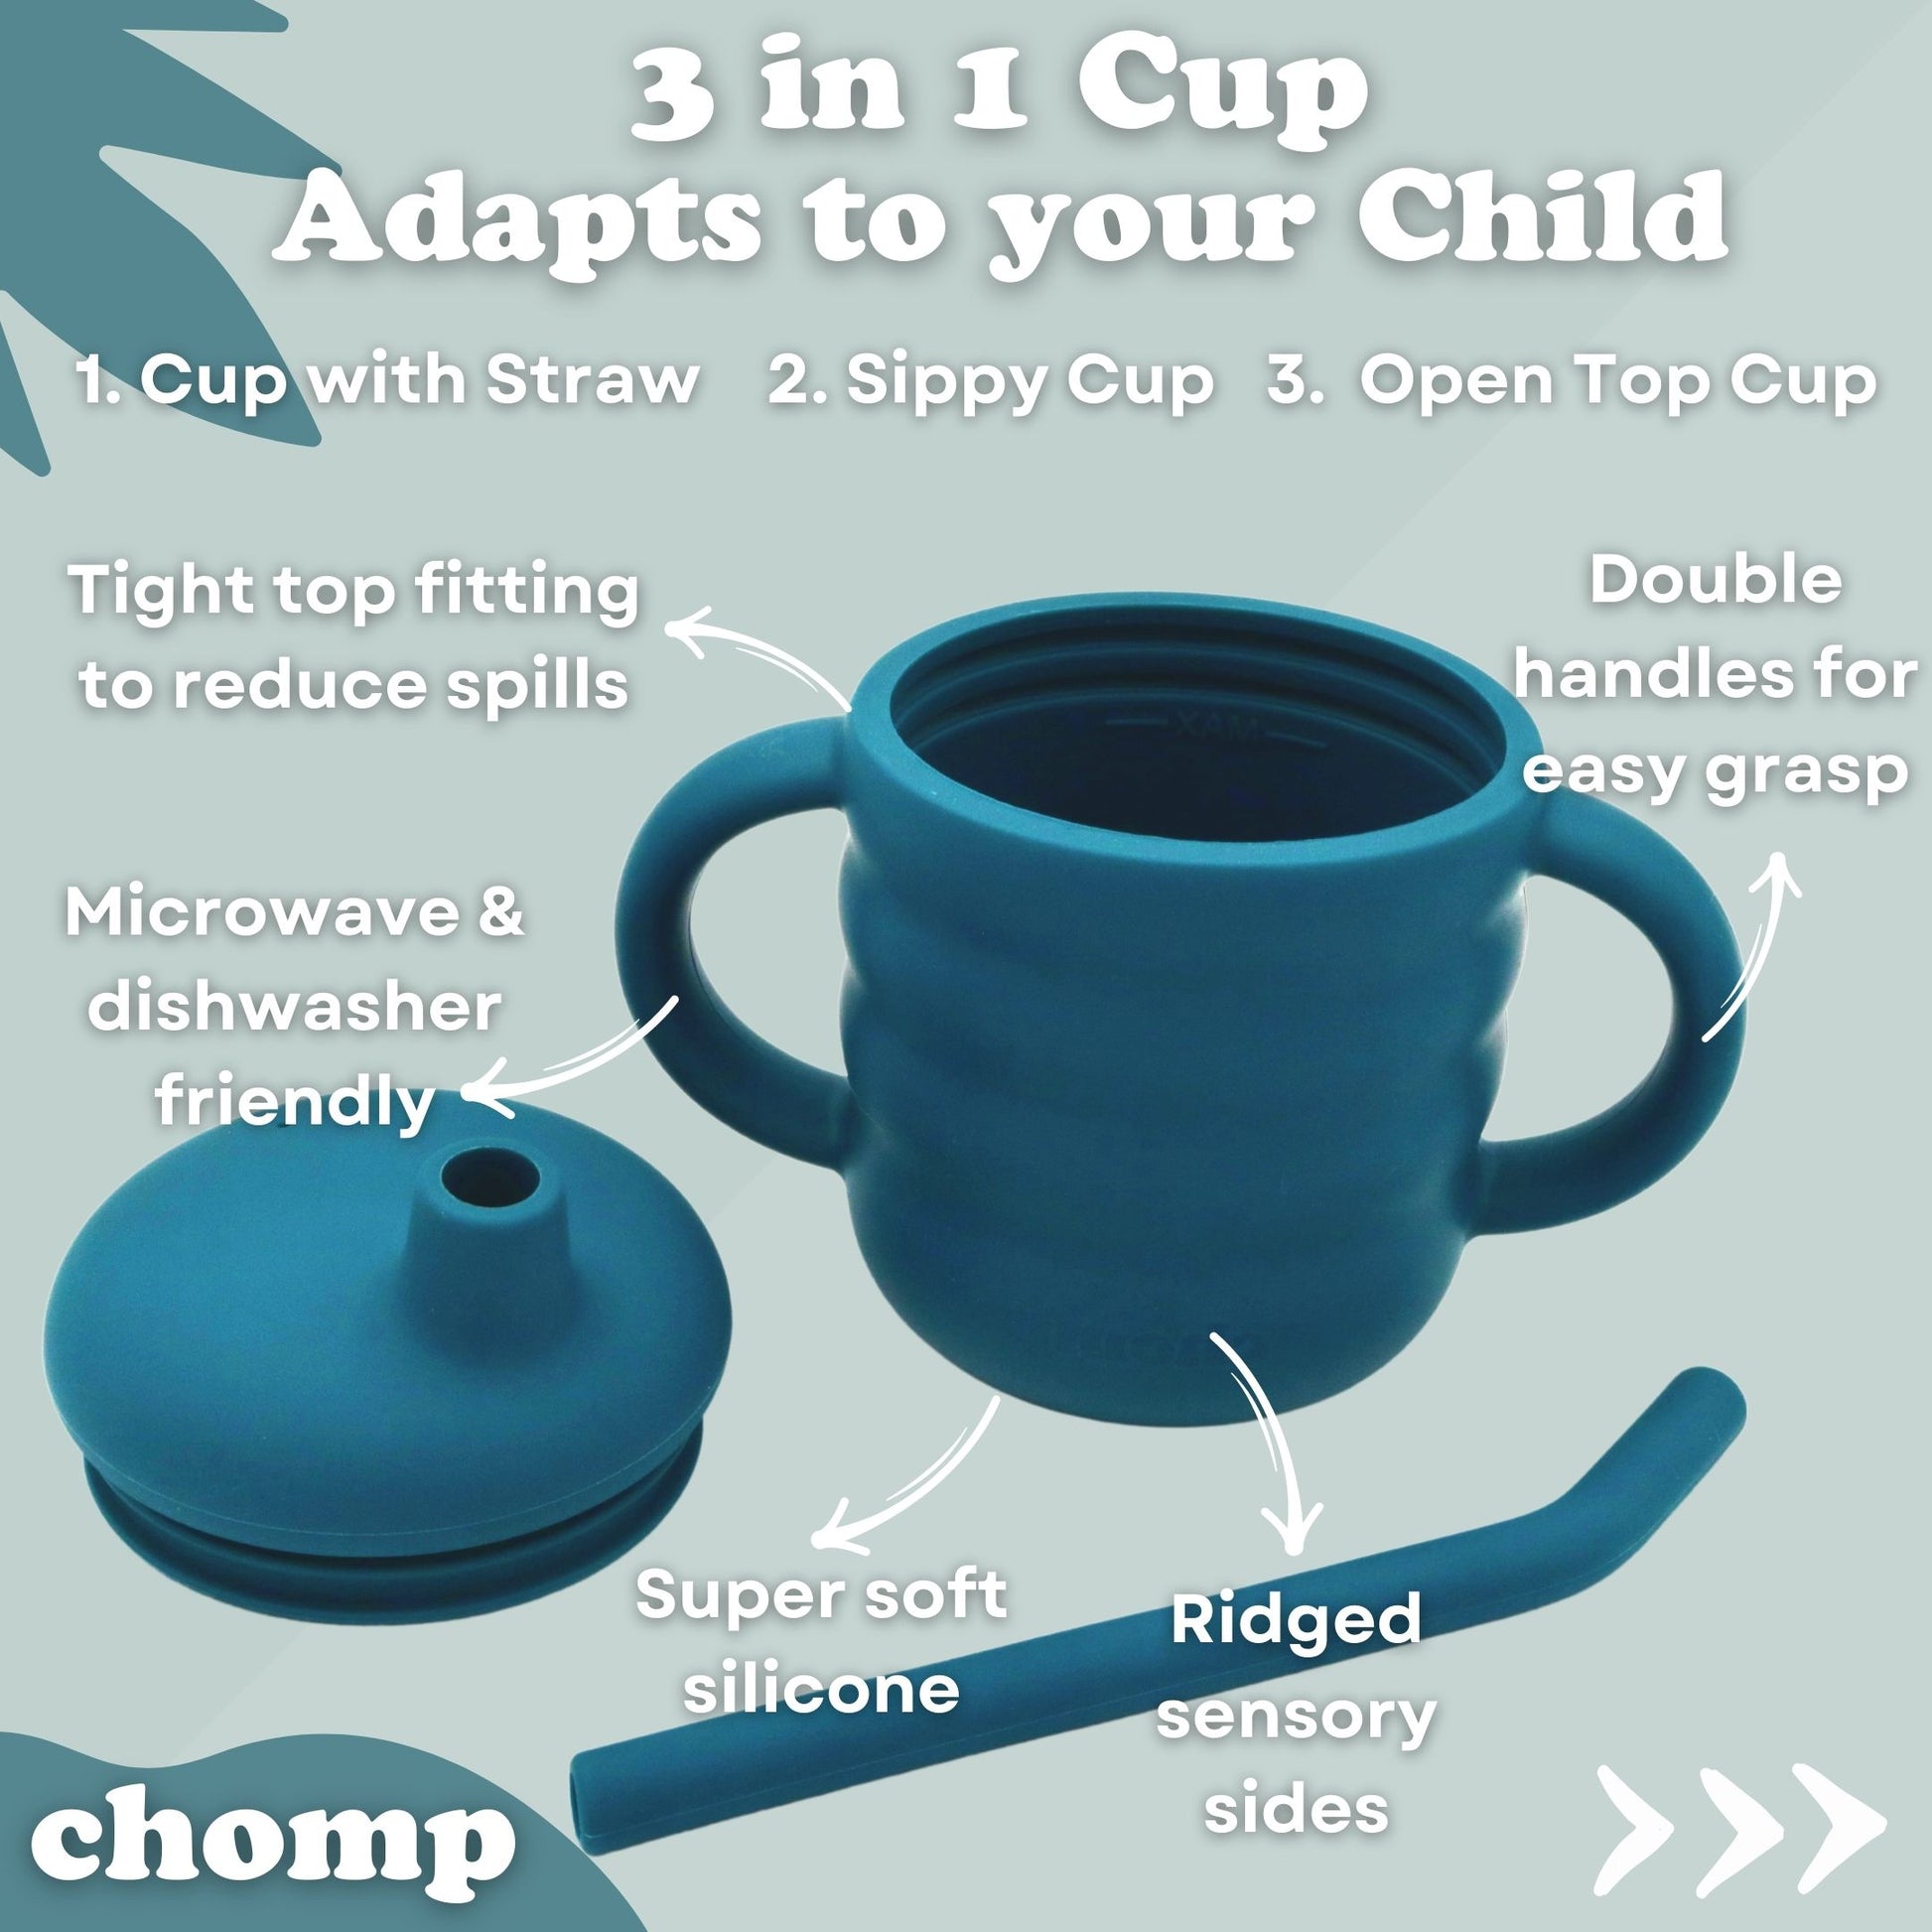 Kids Children Infant Baby Sip Cup with Built in Straw Mug Drink Home Cup